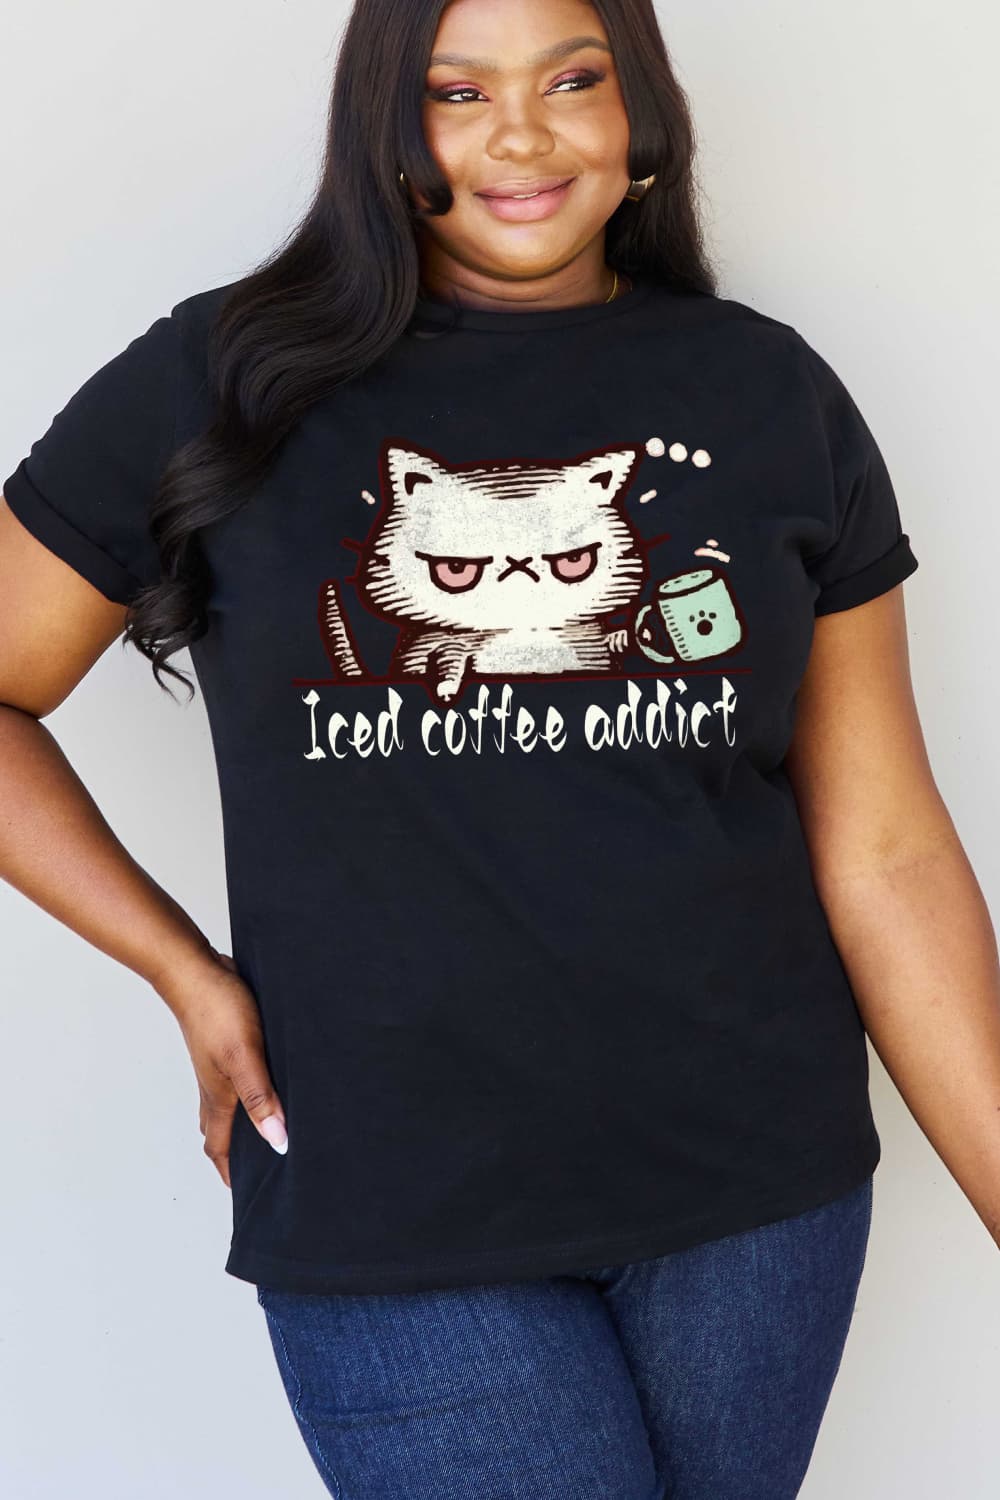 Simply Love Full Size ICED COFFEE ADDICT Graphic Cotton Tee